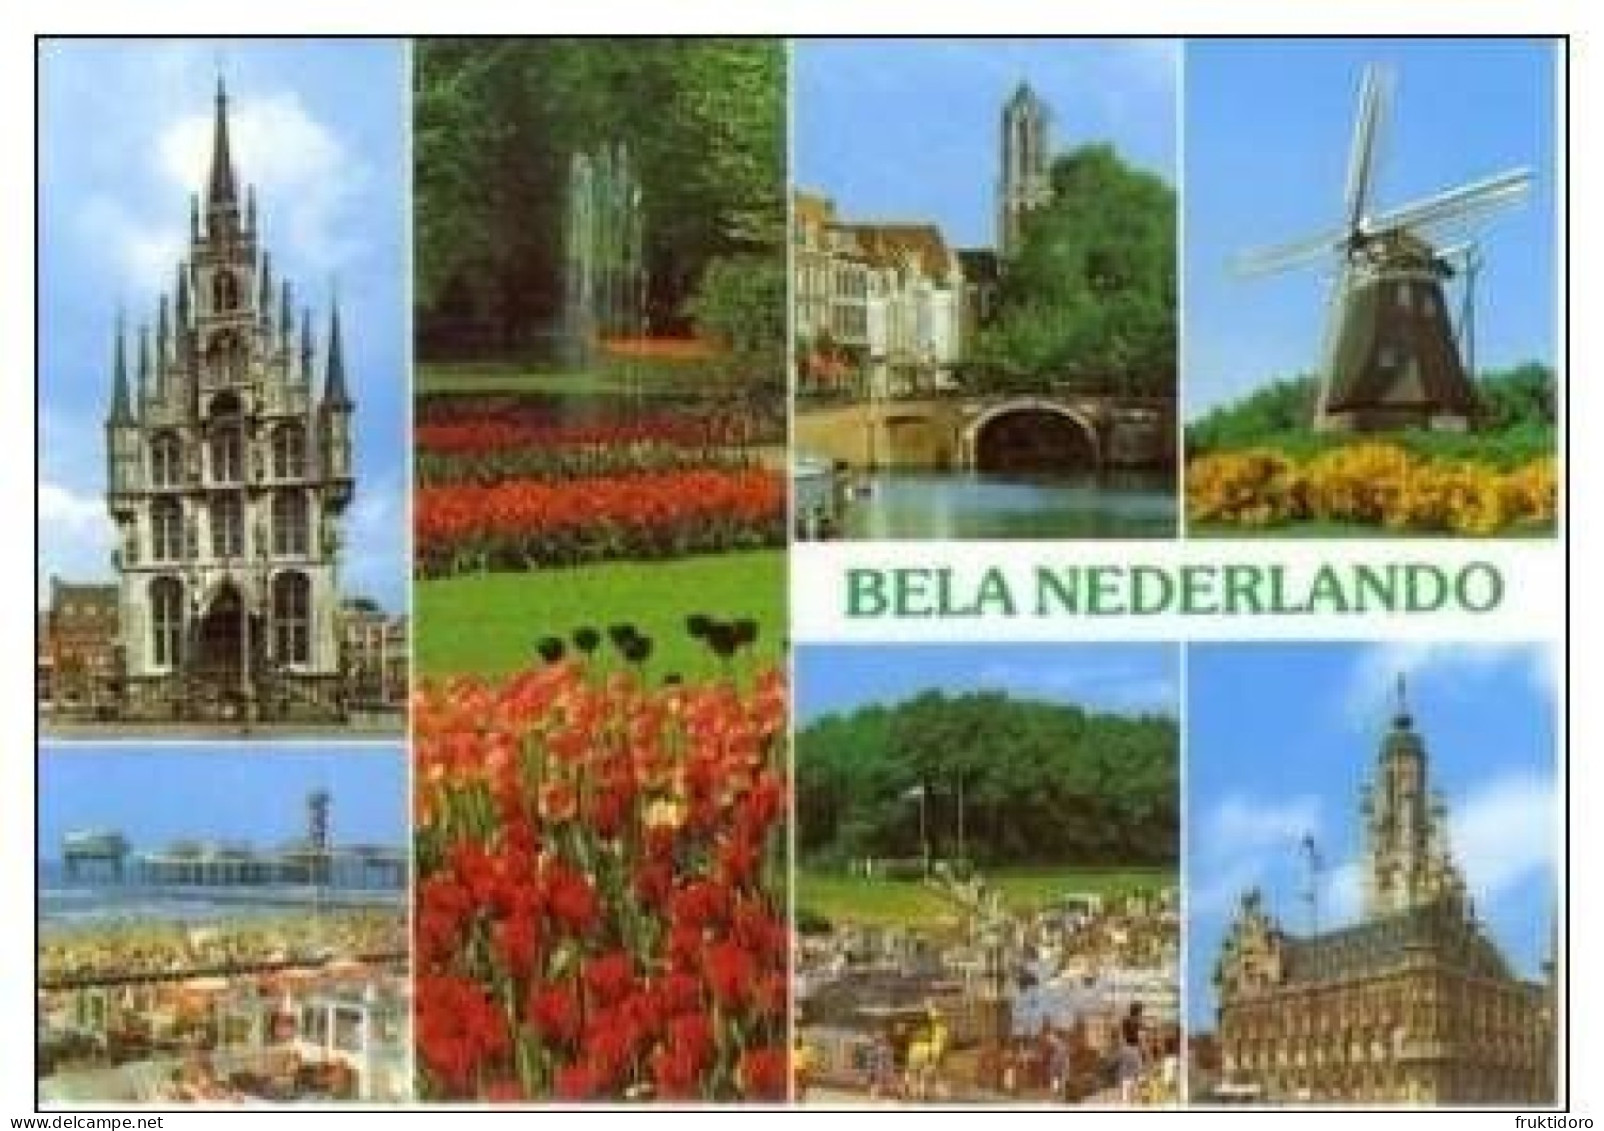 AKEO 23 Esperanto Cards the Netherlands - Tulips - Cheese - Windmill - Canals - Harbour - Text in Esperanto